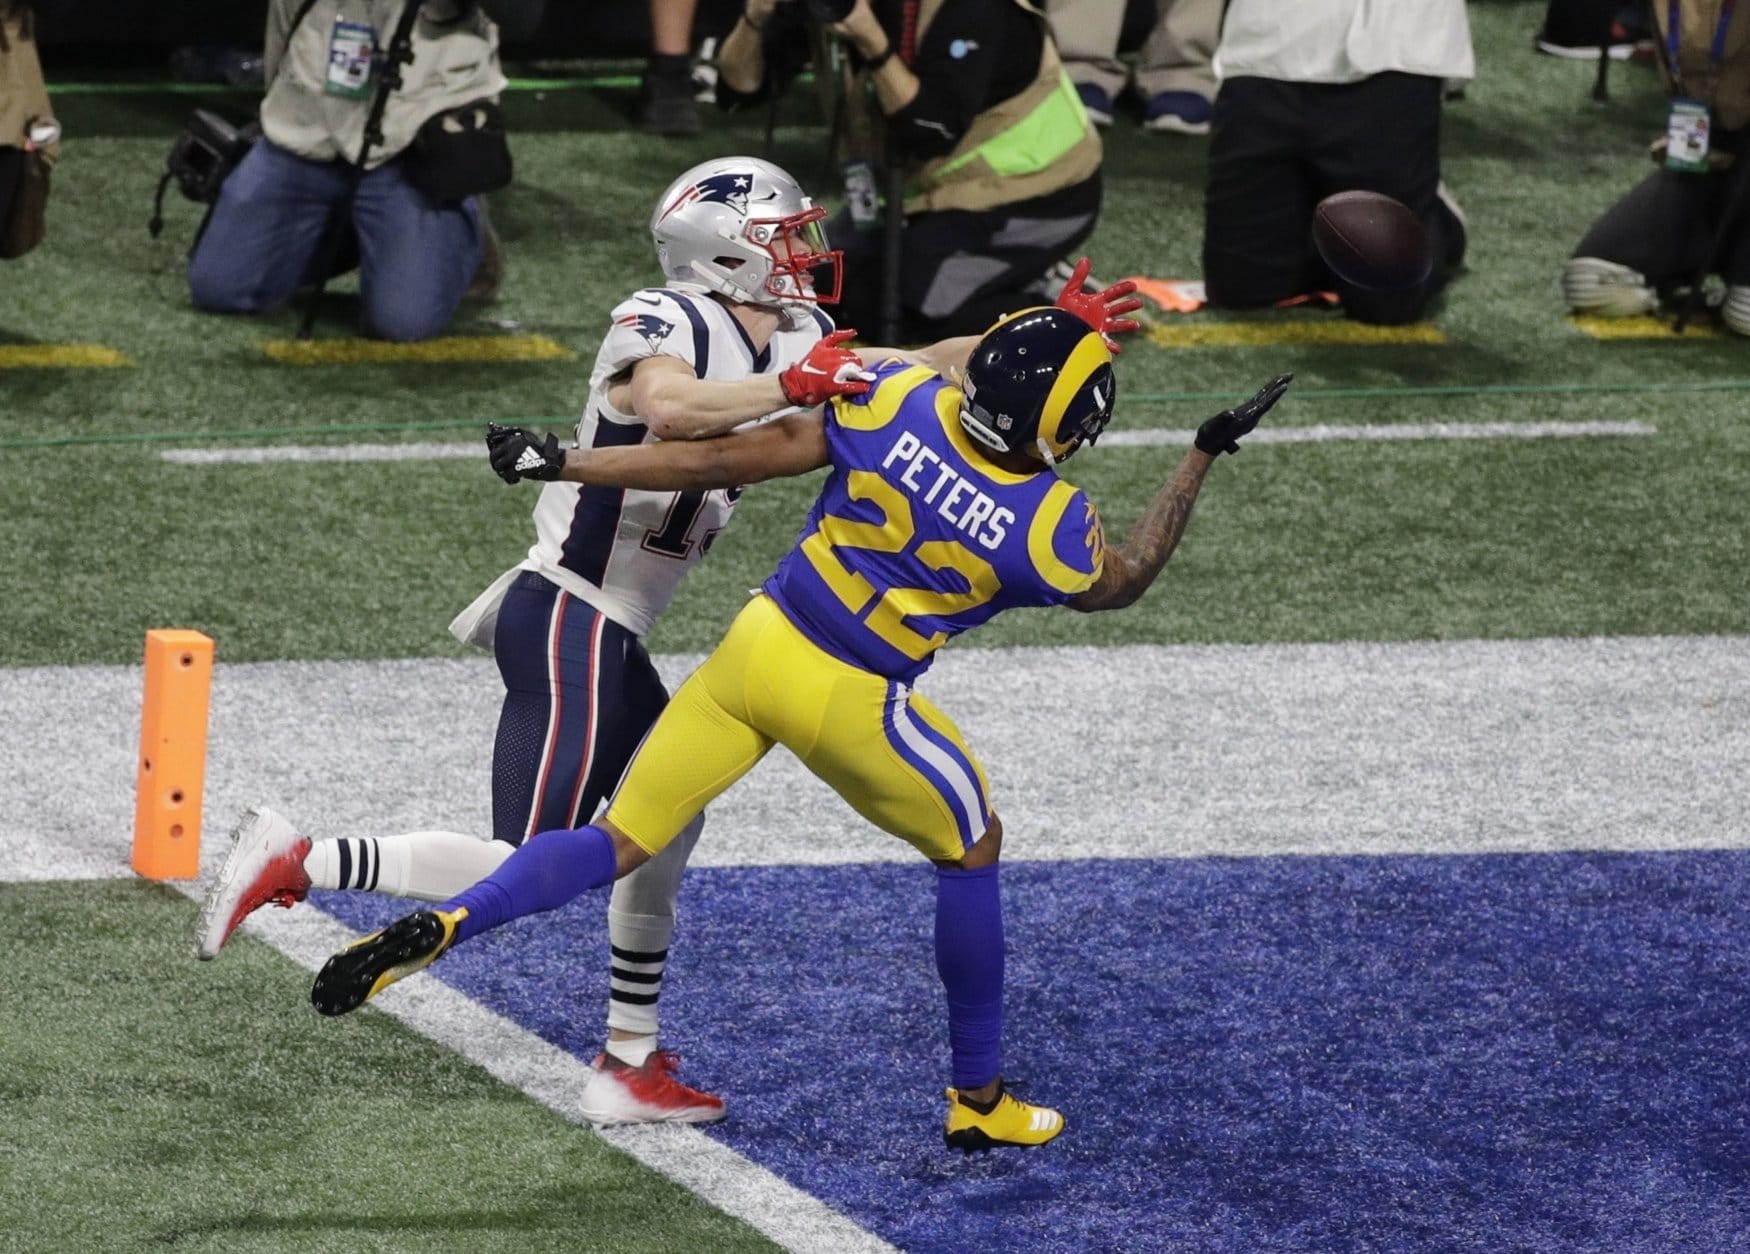 New England Patriots' Chris Hogan (15) is defended by Los Angeles Rams' Marcus Peters (22) during the first half of the NFL Super Bowl 53 football game Sunday, Feb. 3, 2019, in Atlanta. (AP Photo/Charlie Riedel)